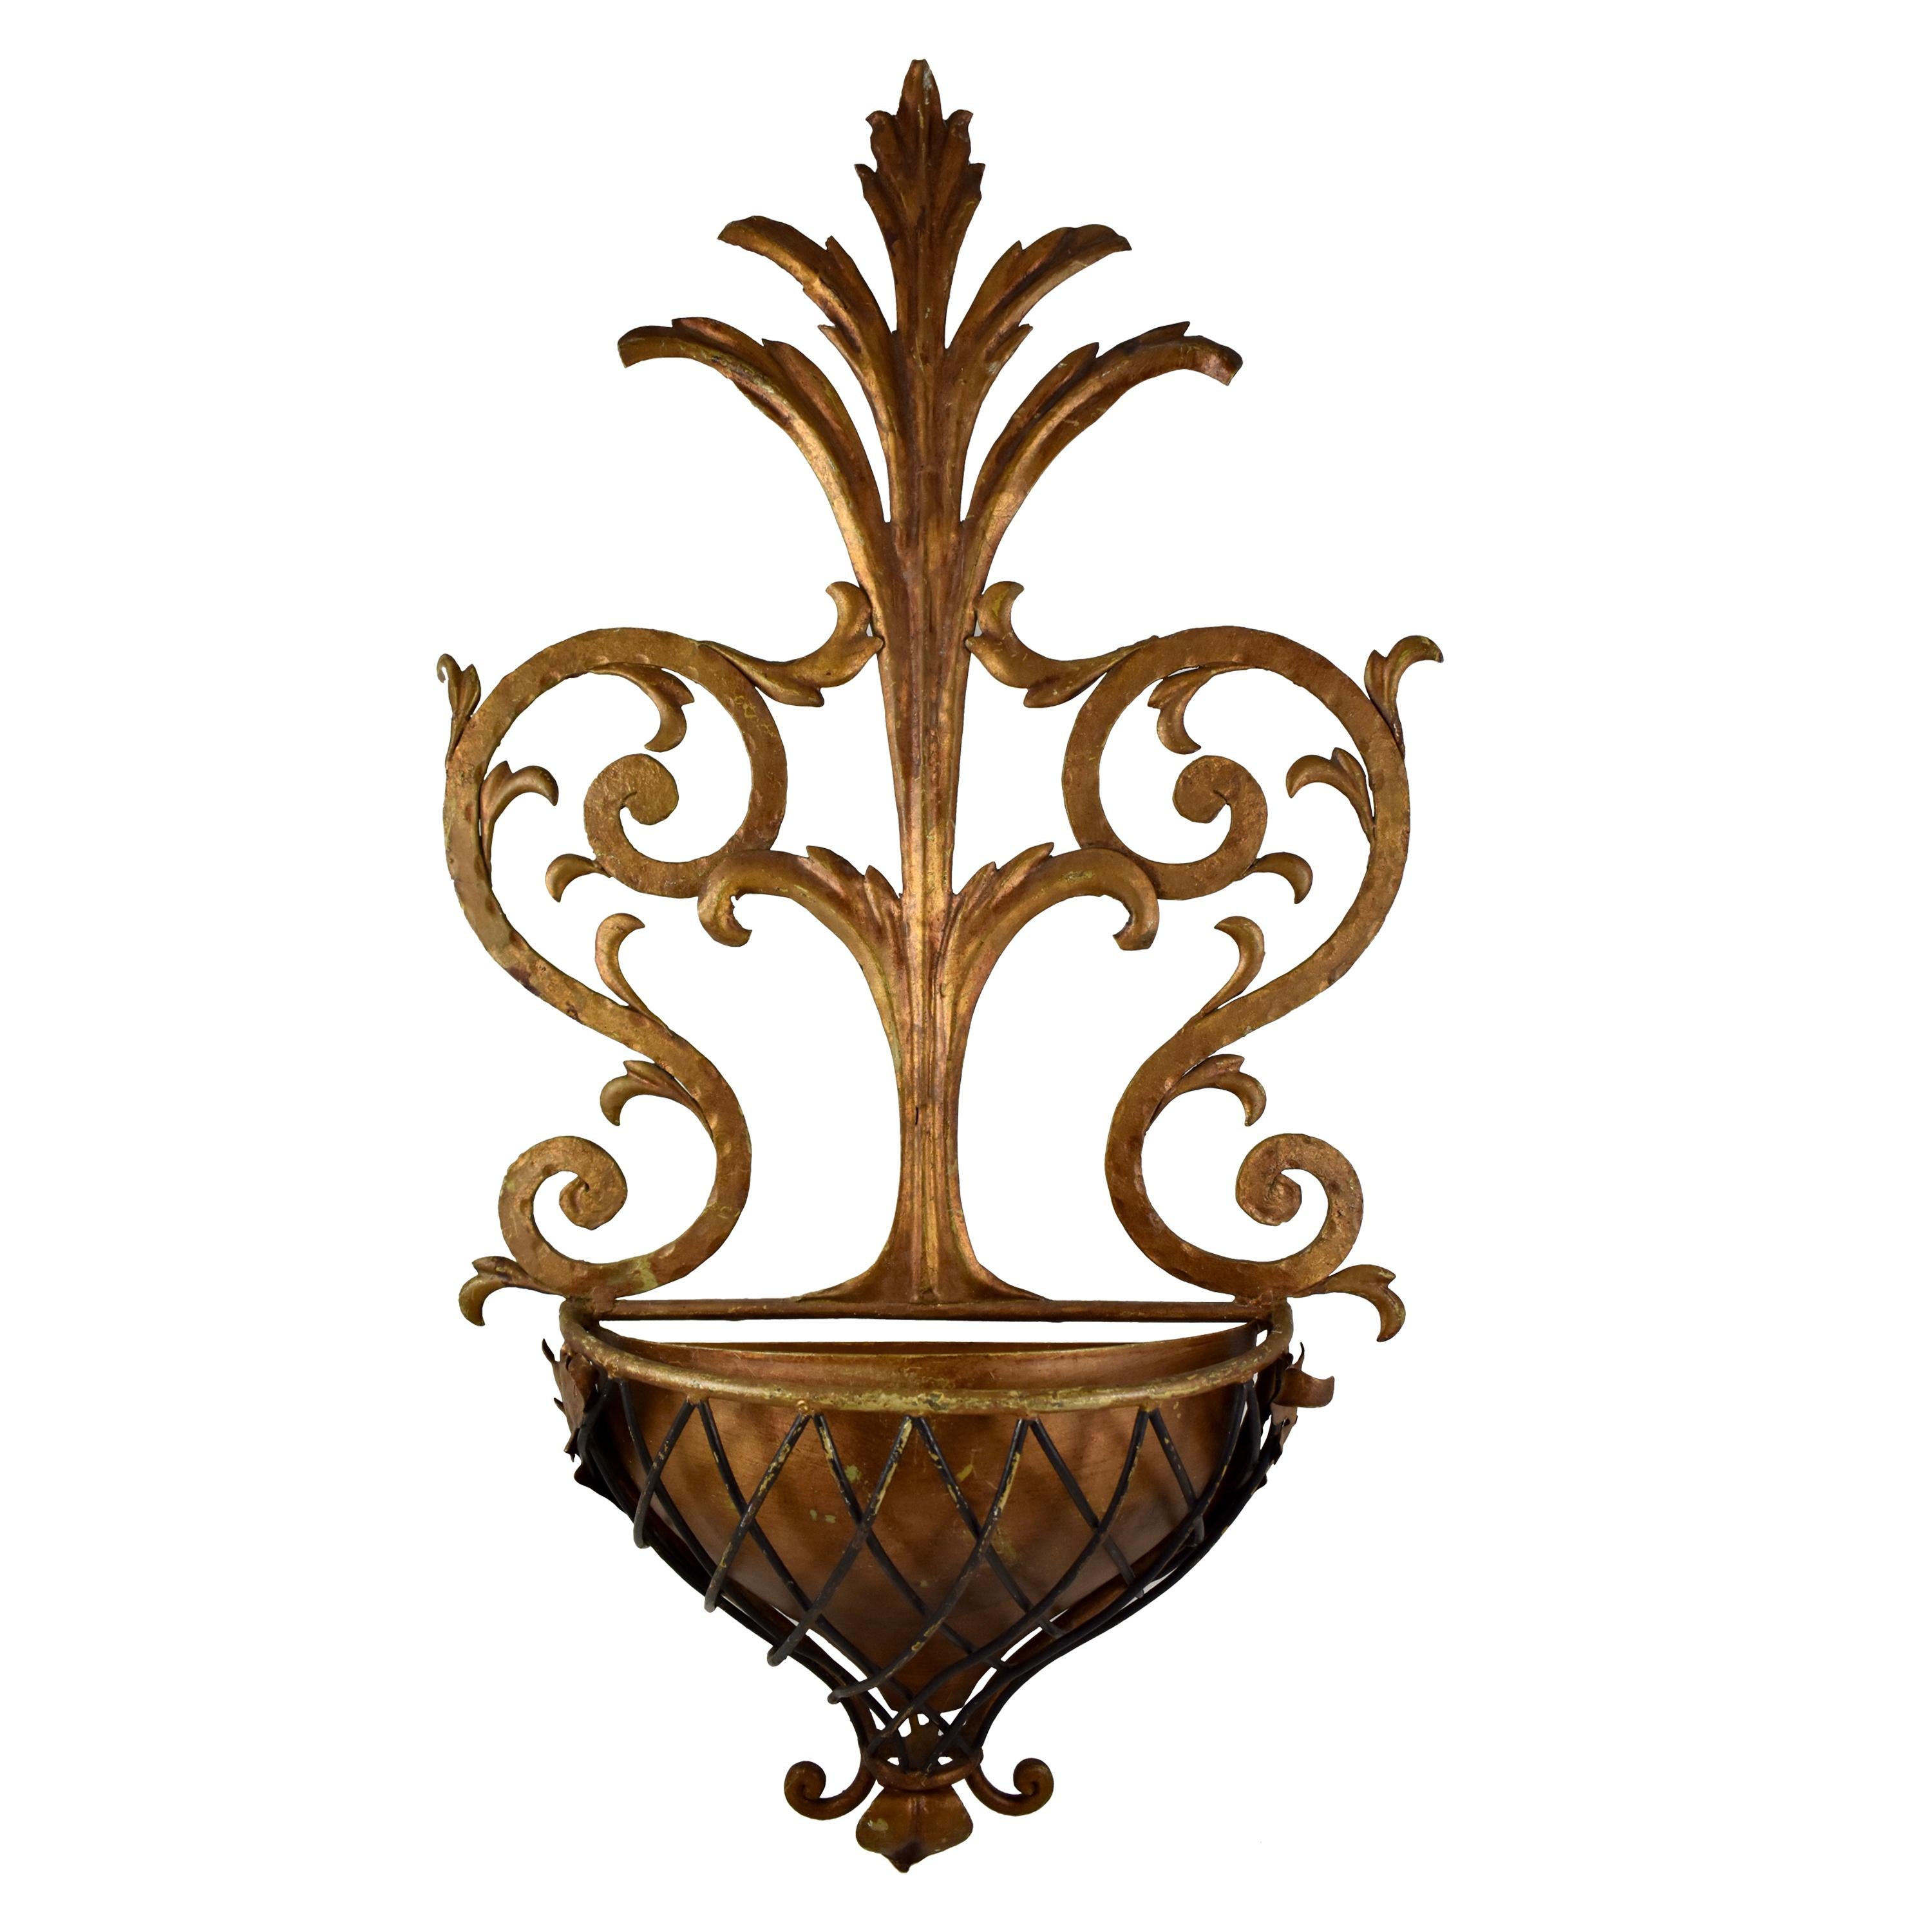 Hollywood Regency Palm Beach Estate Gilded Iron and Copper Wall Planter